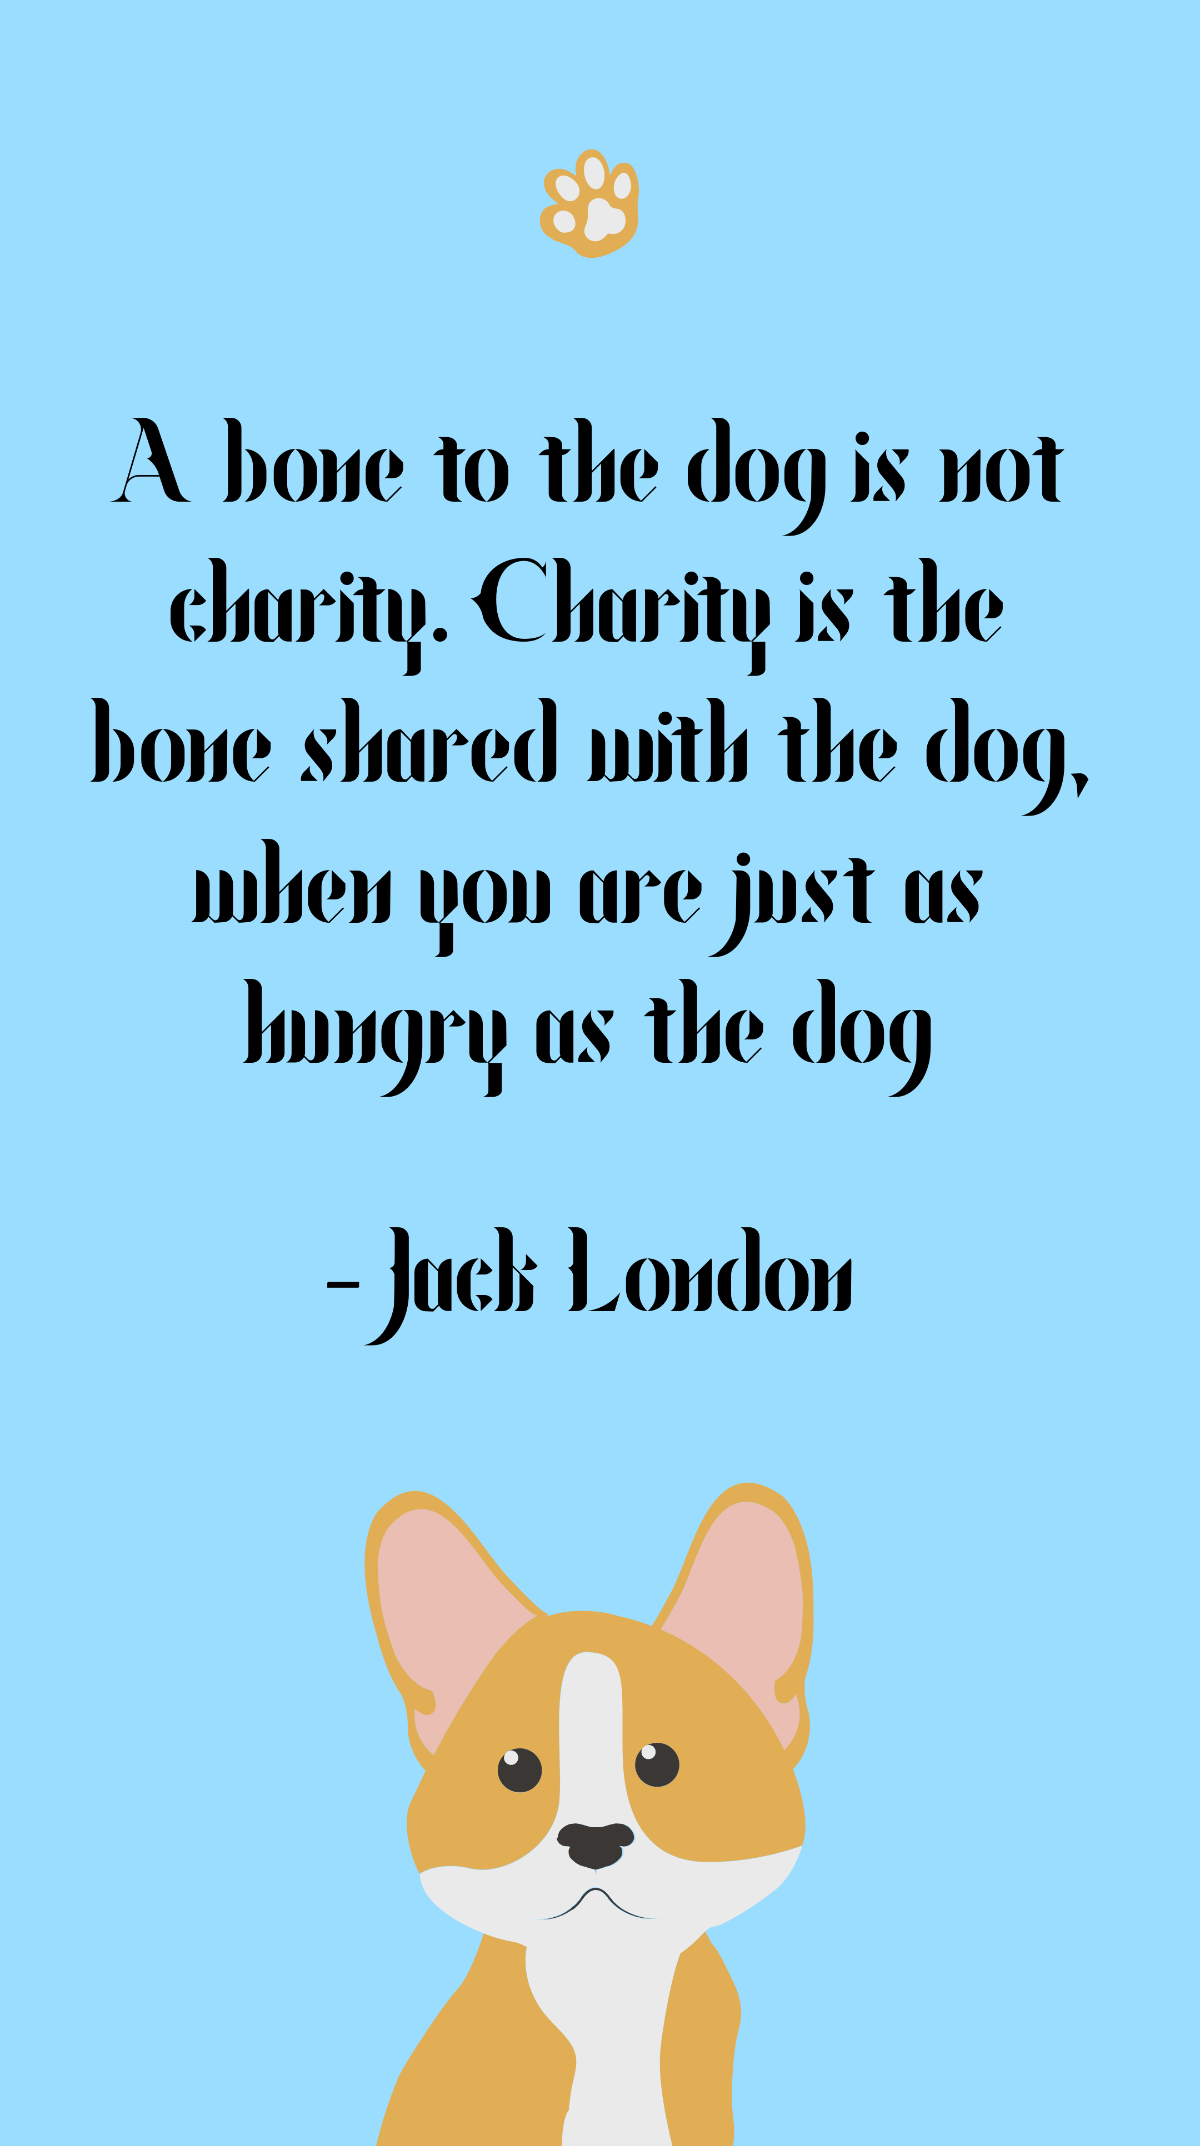 Jack London - A bone to the dog is not charity. Charity is the bone shared with the dog, when you are just as hungry as the dog